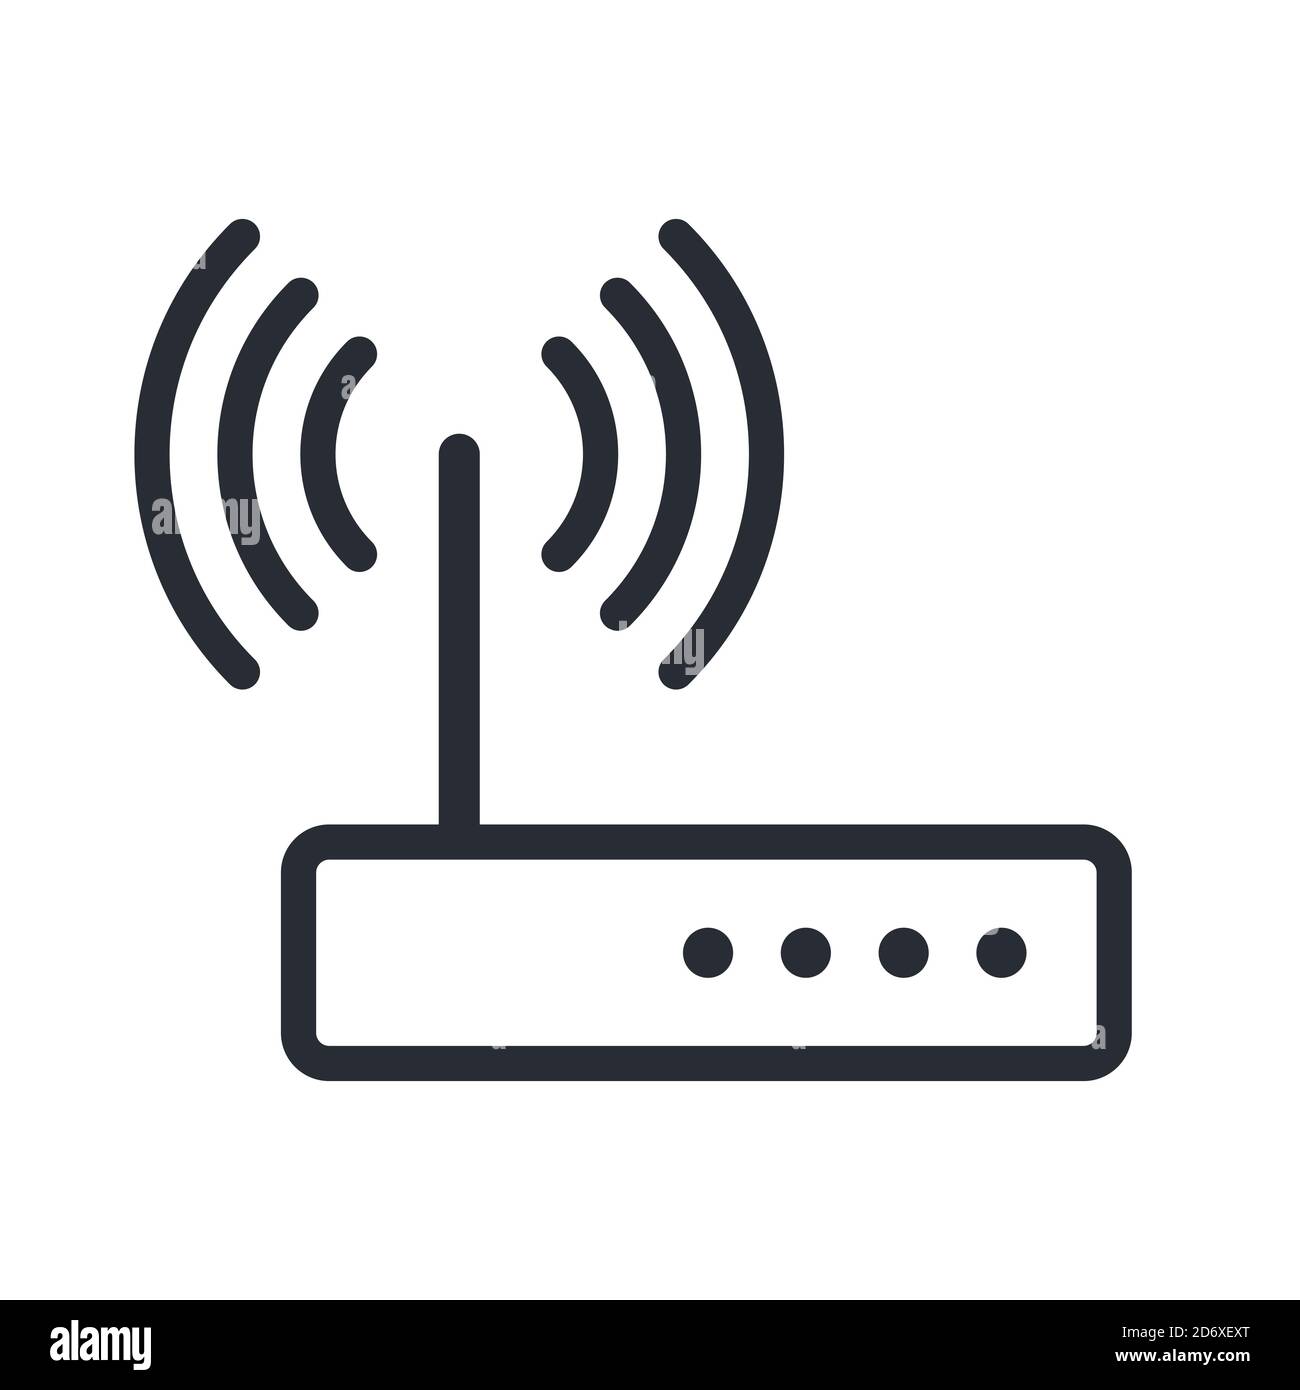 Router icon simple style Cut Out Stock Images & Pictures - Alamy